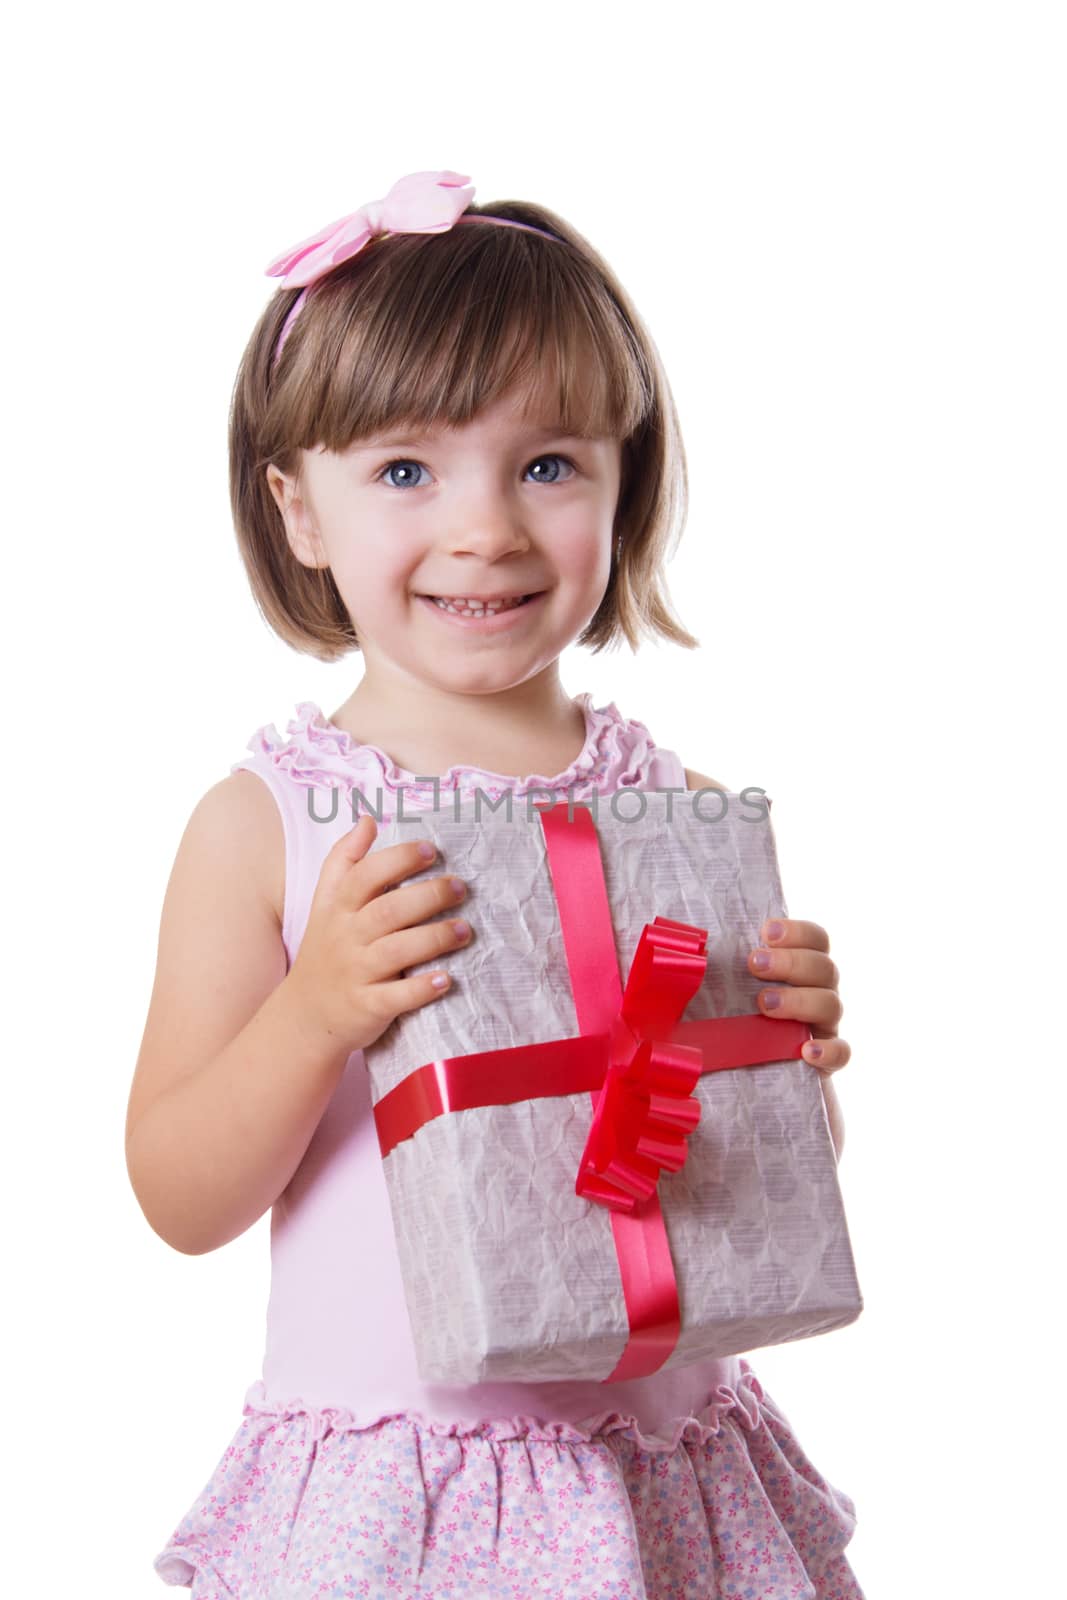 Smiling little girl holding present box by Angel_a